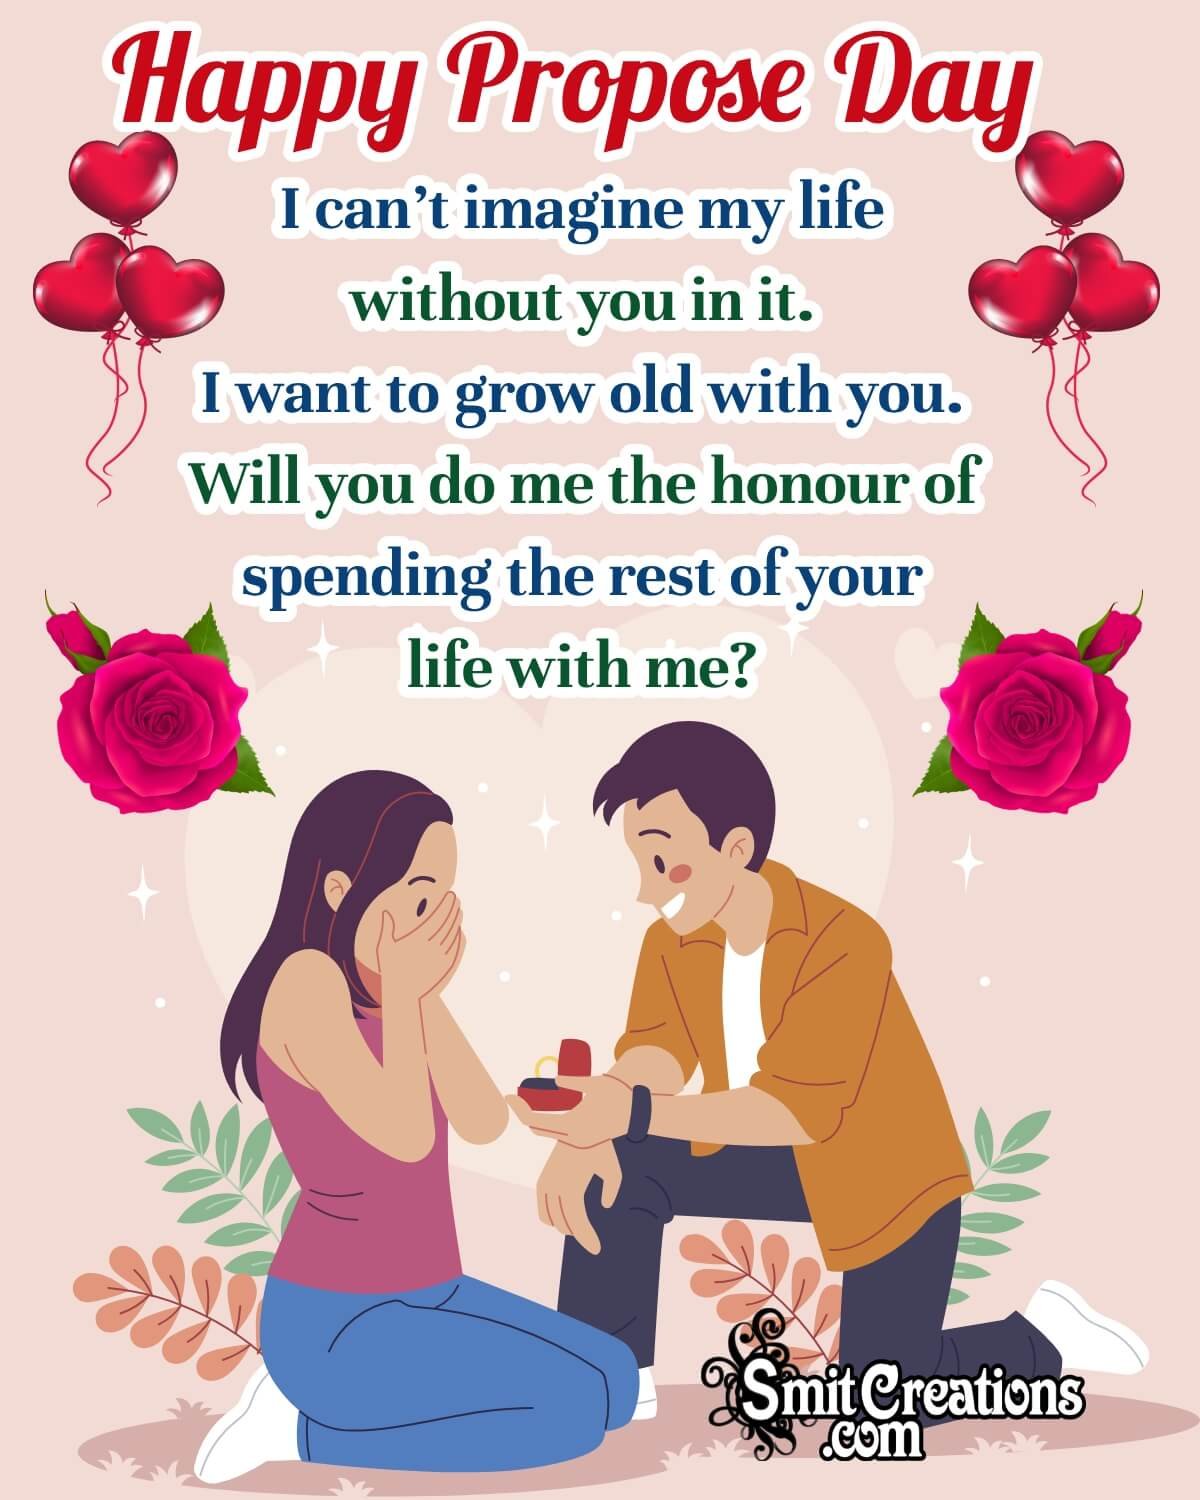 Happy Propose Day Wishes For Girlfriend